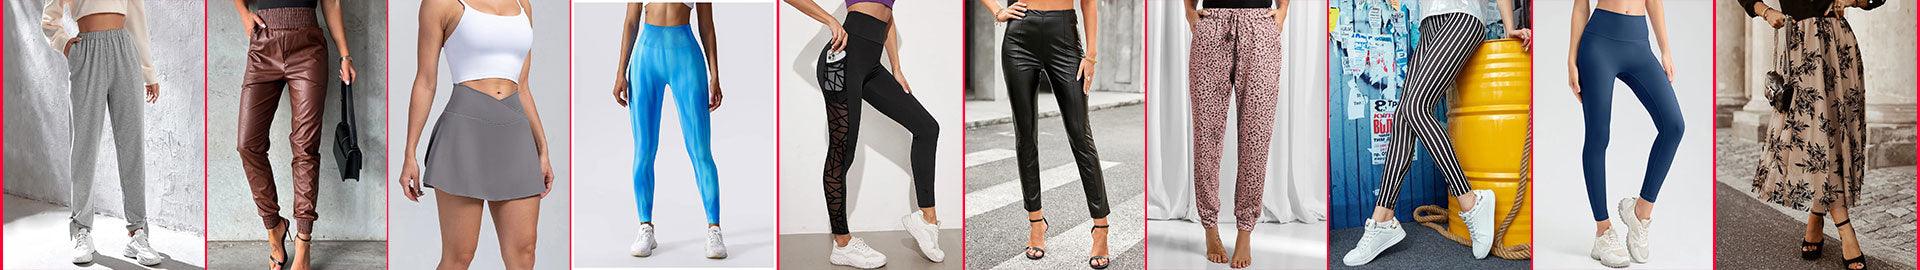 Shop Online Bottoms For Women - Daily Fashion